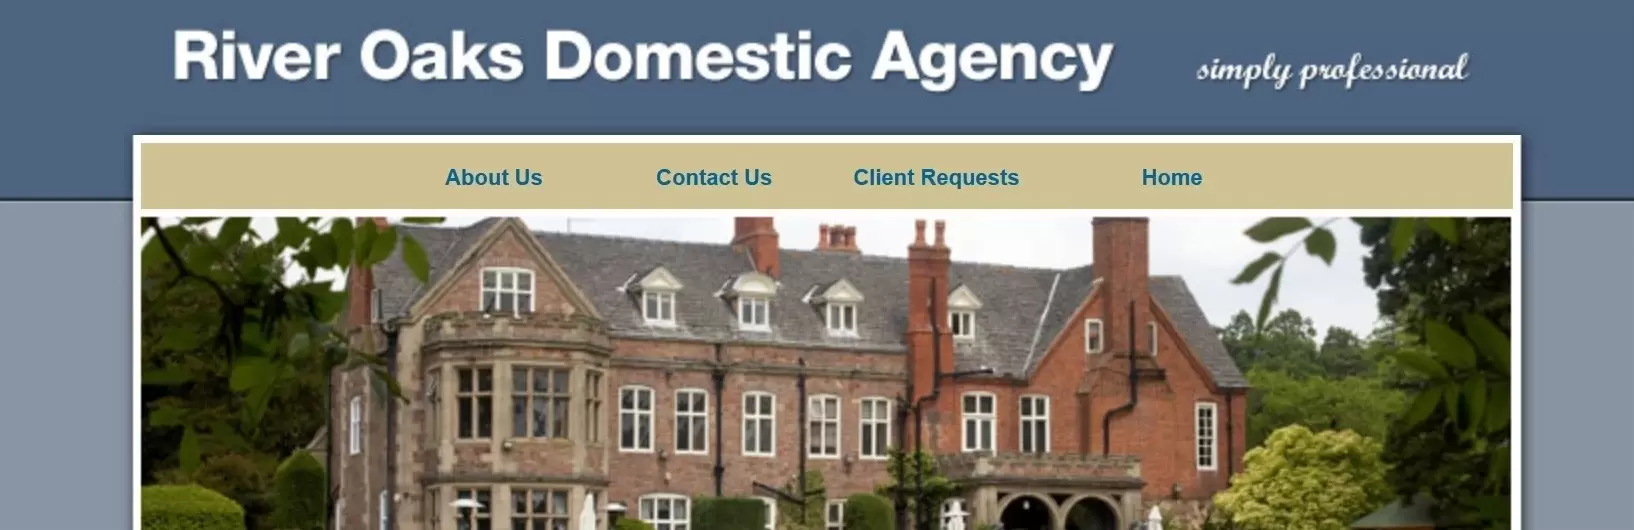 River Oaks Domestic Agency company profile and review